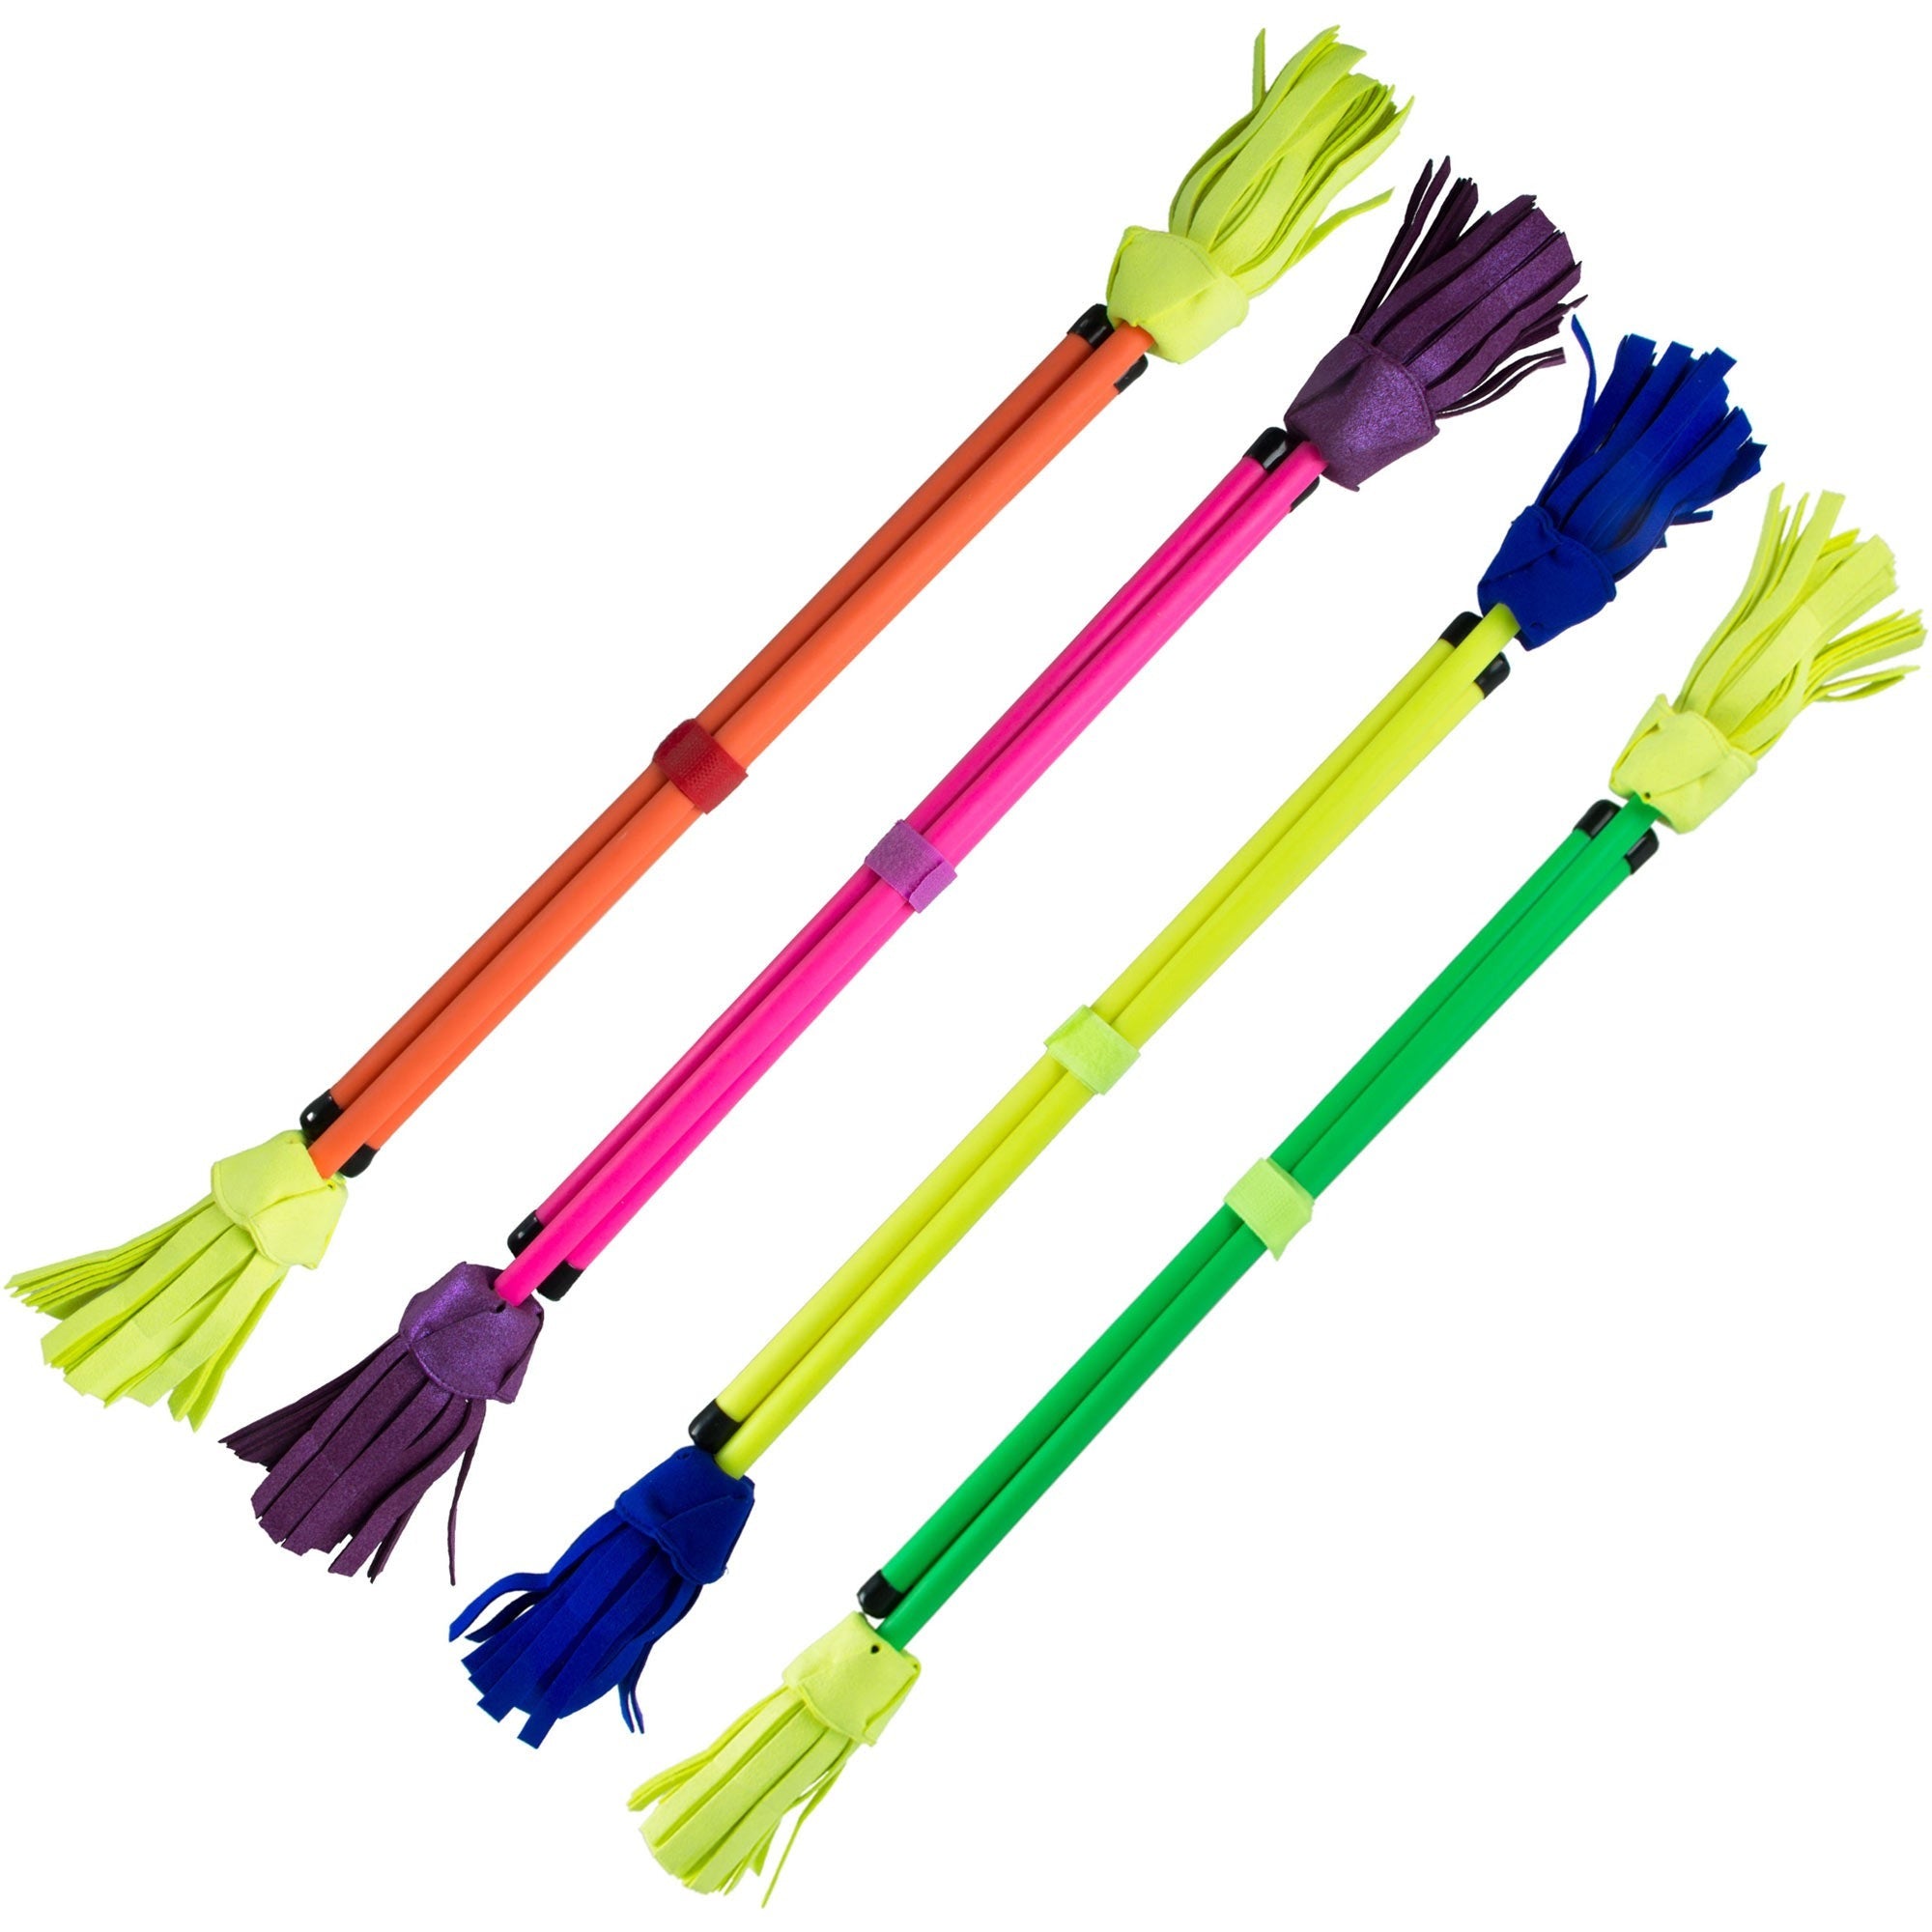 4 brightly coloured Neo flowersticks in a row